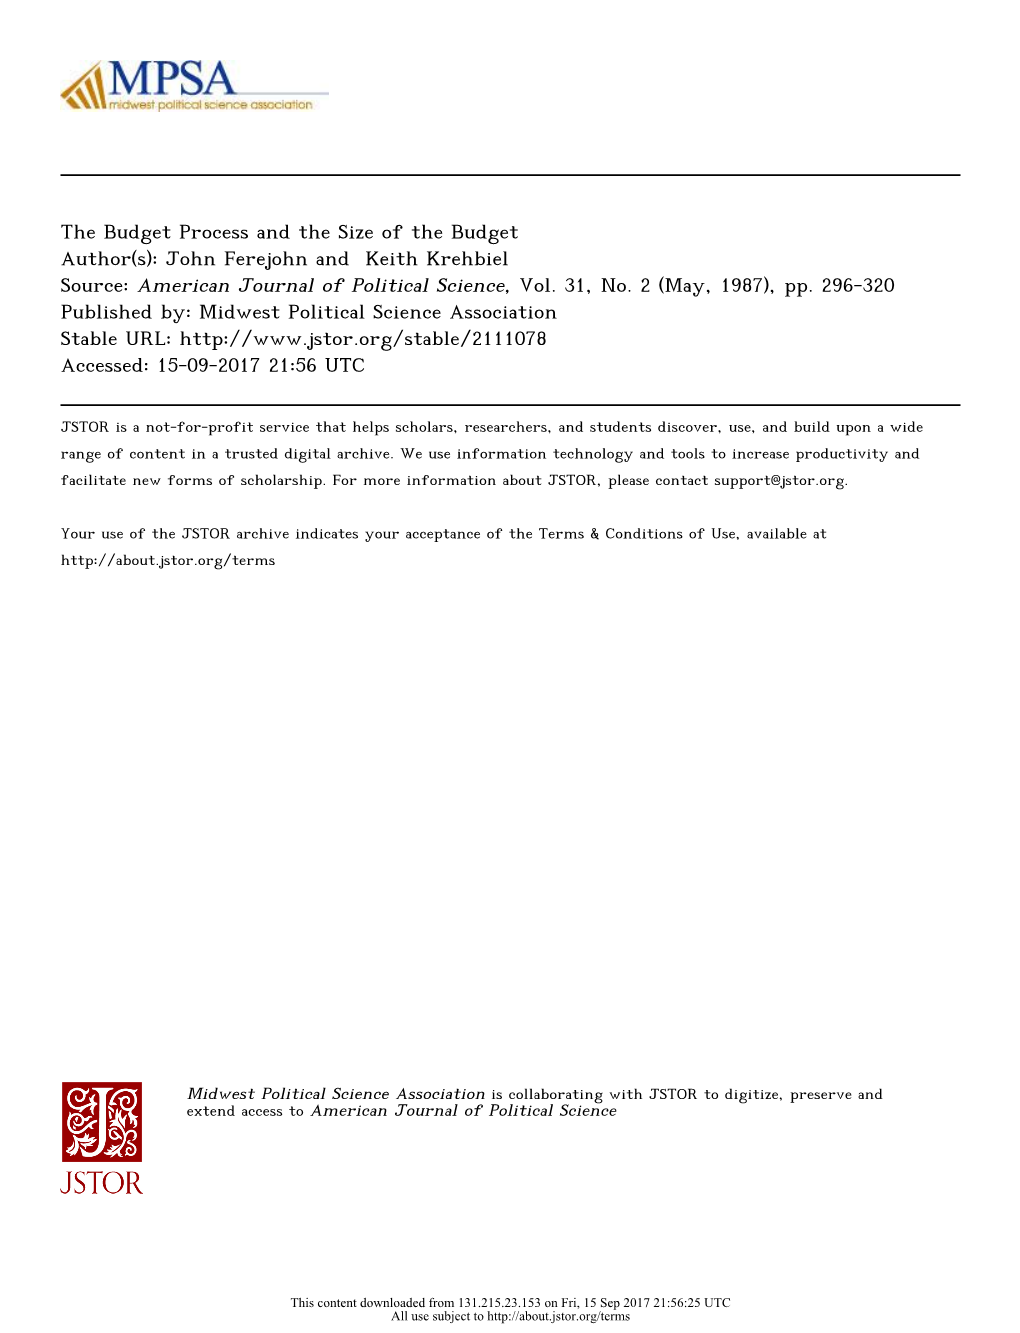 The Budget Process and the Size of the Budget Author(S): John Ferejohn and Keith Krehbiel Source: American Journal of Political Science, Vol